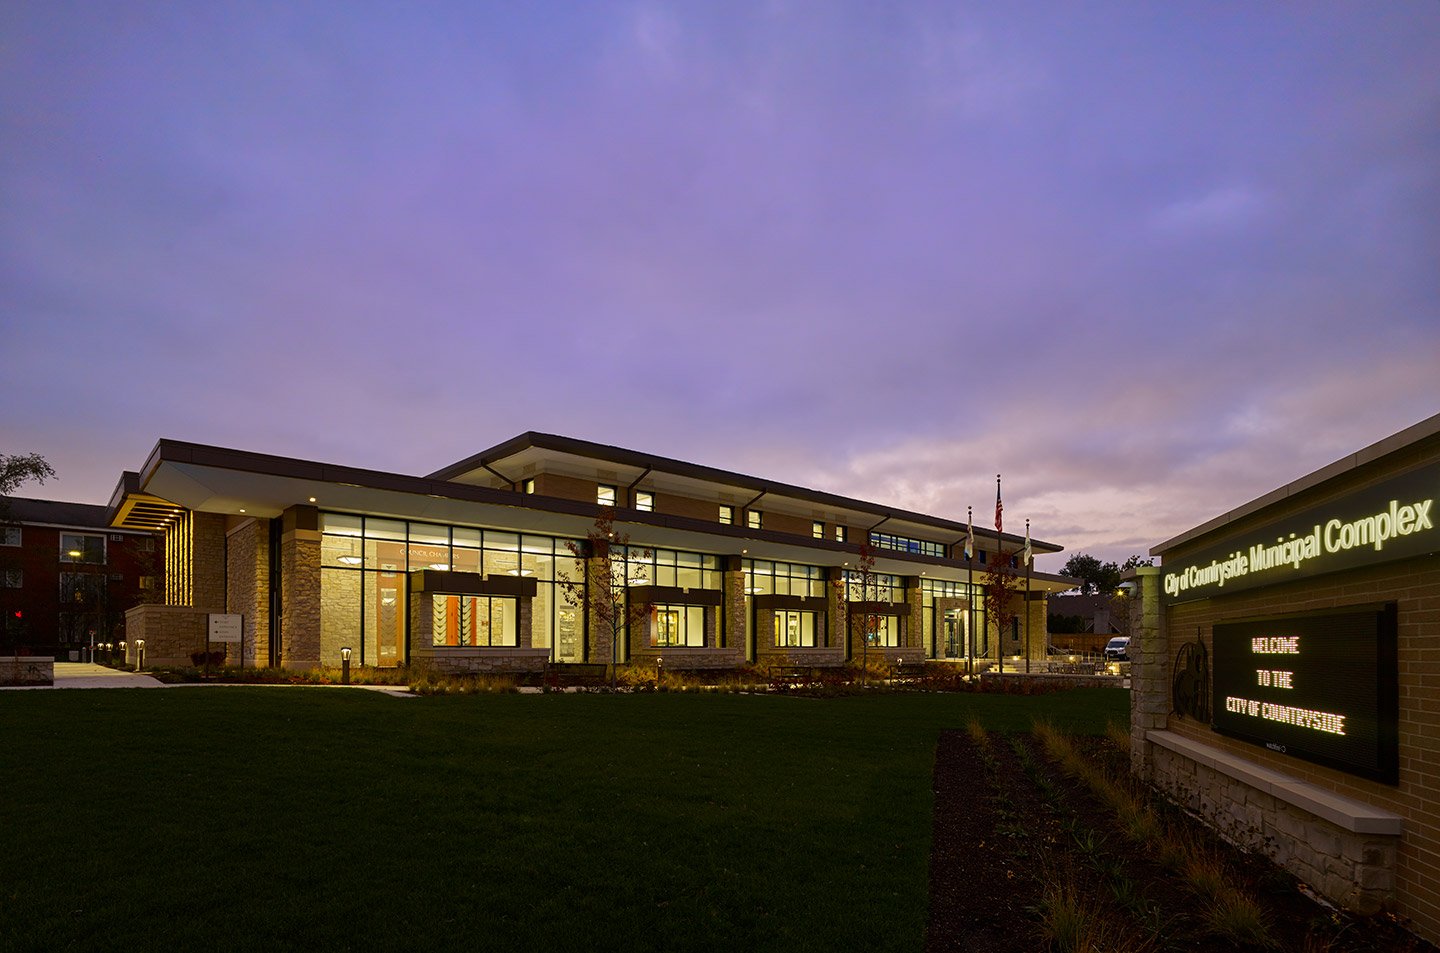 The Countryside Municipal Complex in Countryside, Illinois, earned awards from the AIA Academy of Justice, Law Enforcement Design Awards, and the AIA Northeast Illinois chapter. Photo courtesy of Mariusz Mizera.